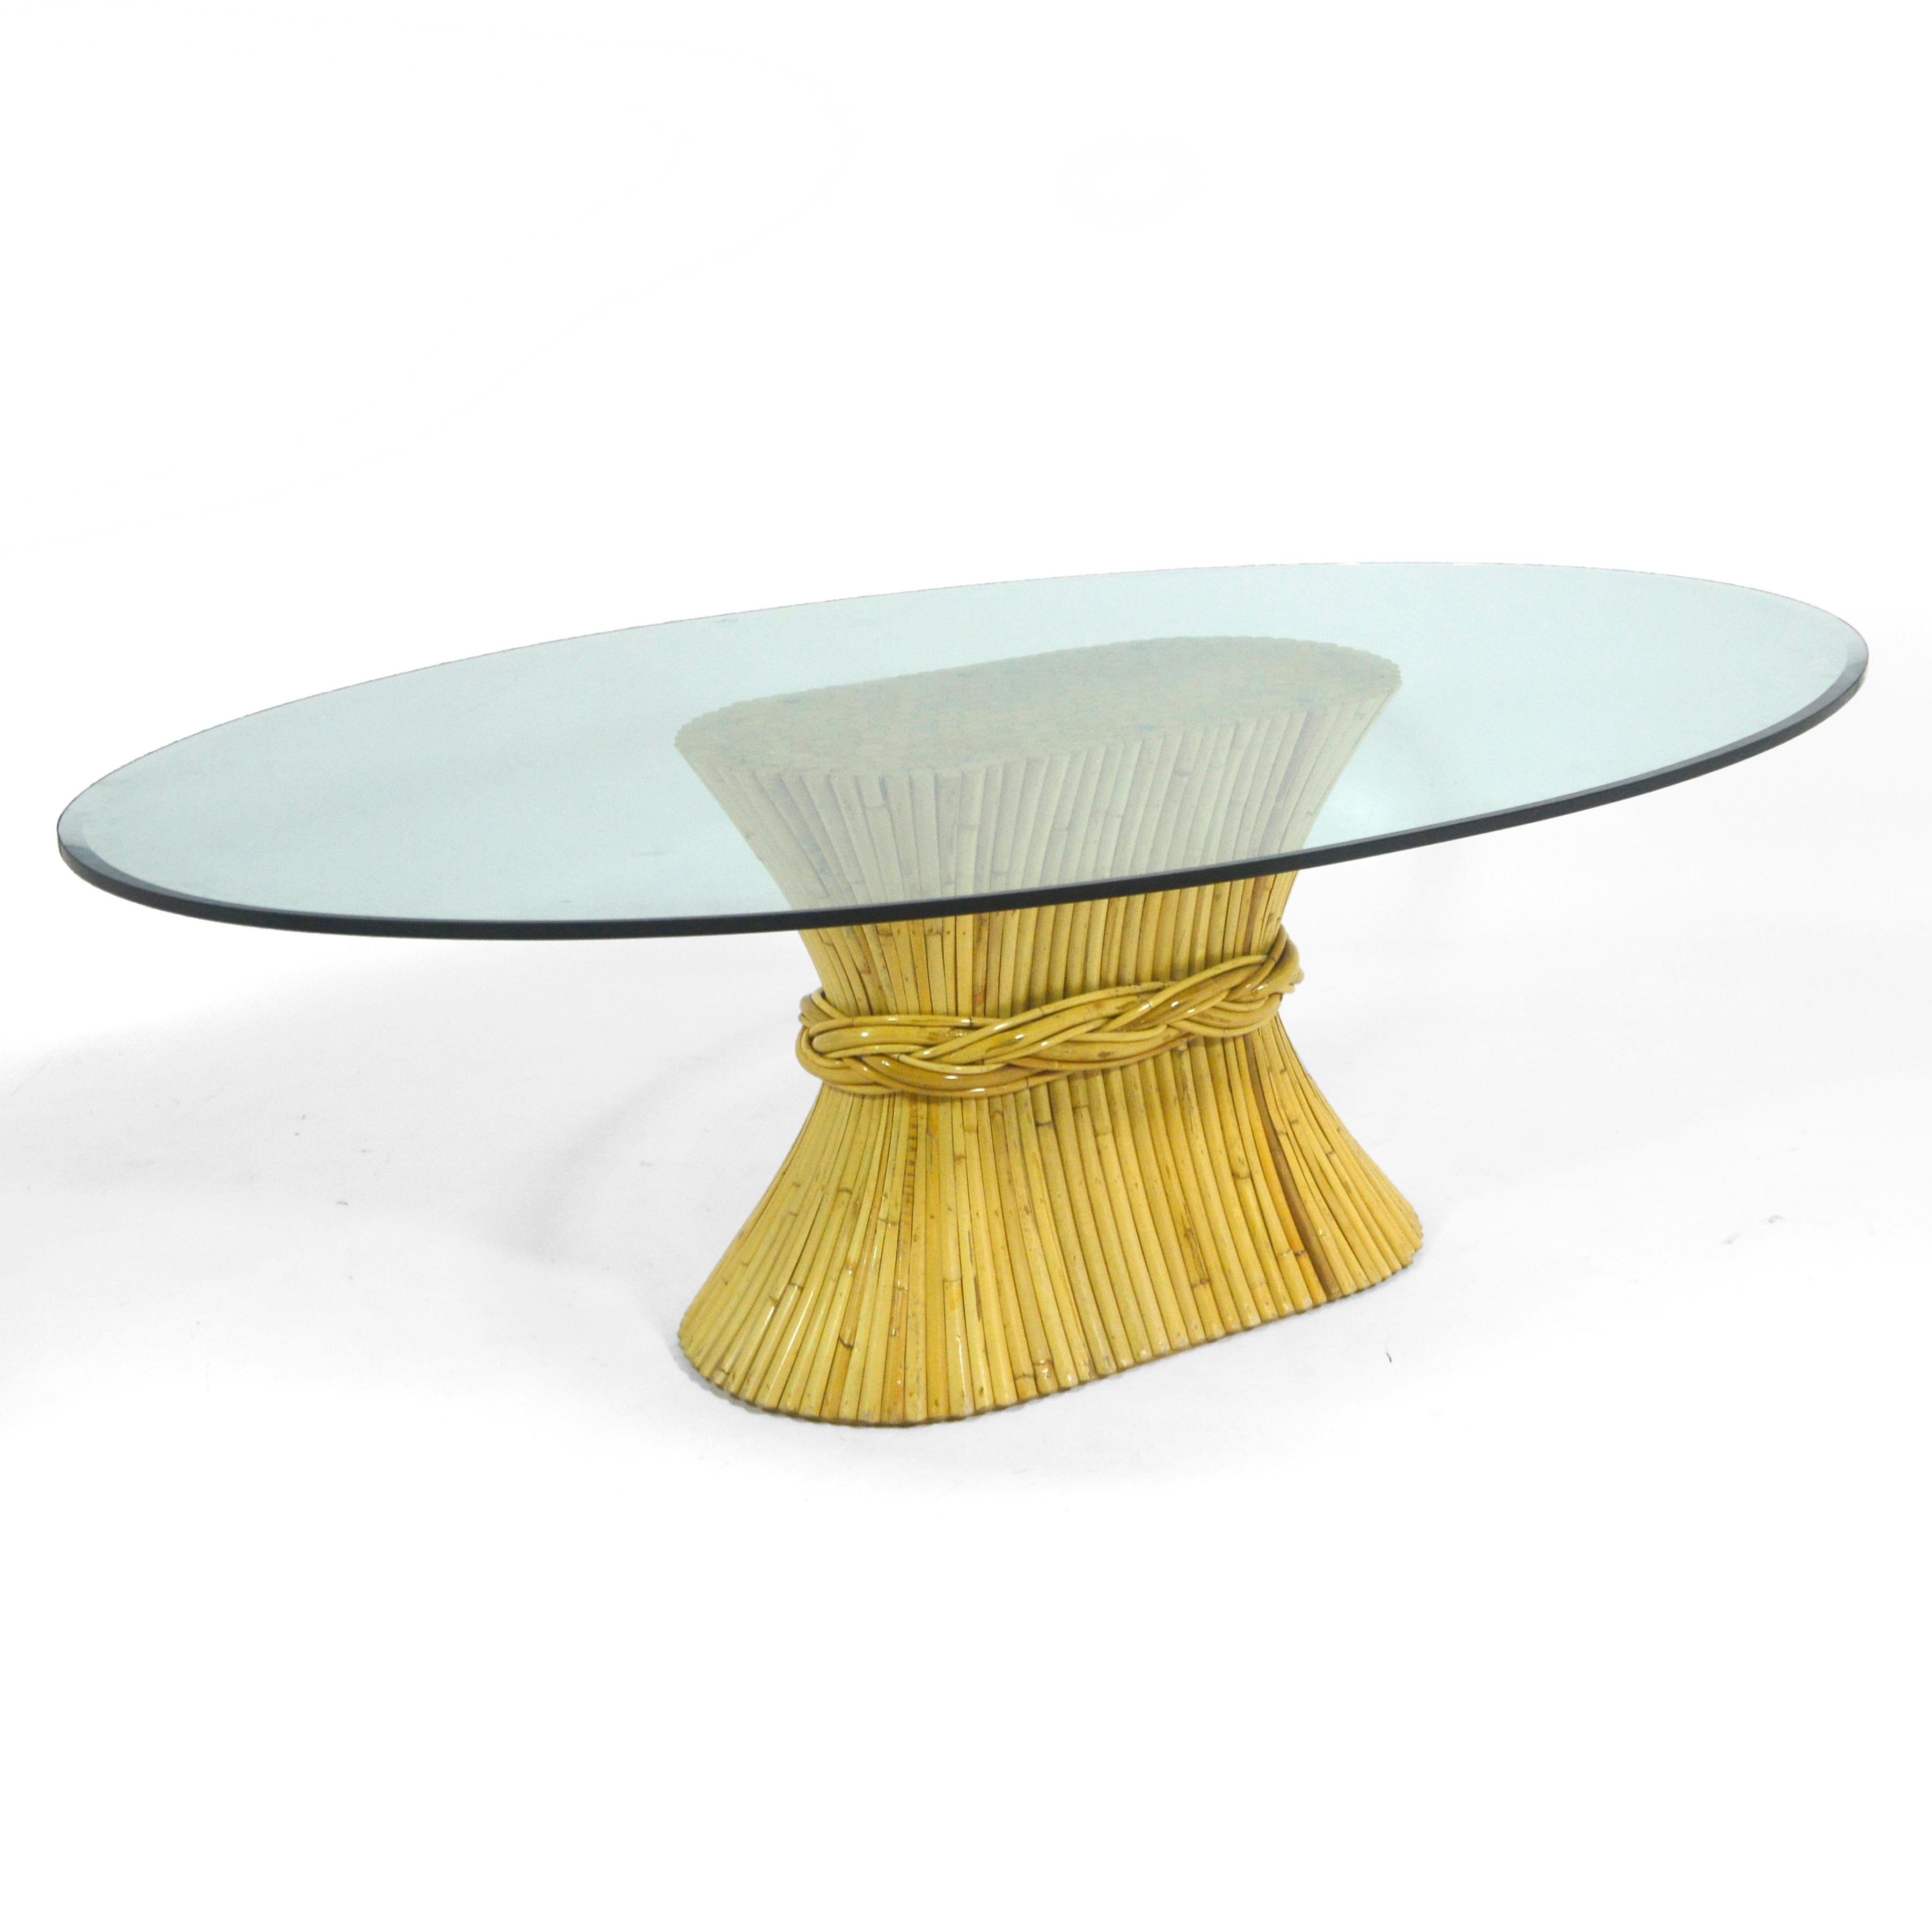 One of Elinor McGuire's most iconic and enduring designs for McGuire of San Fransisco, the NP-12 dining table has a base of rattan gathered at the waist like a sheaf of wheat that supports an elegant elliptical glass top with a beveled edge detail.